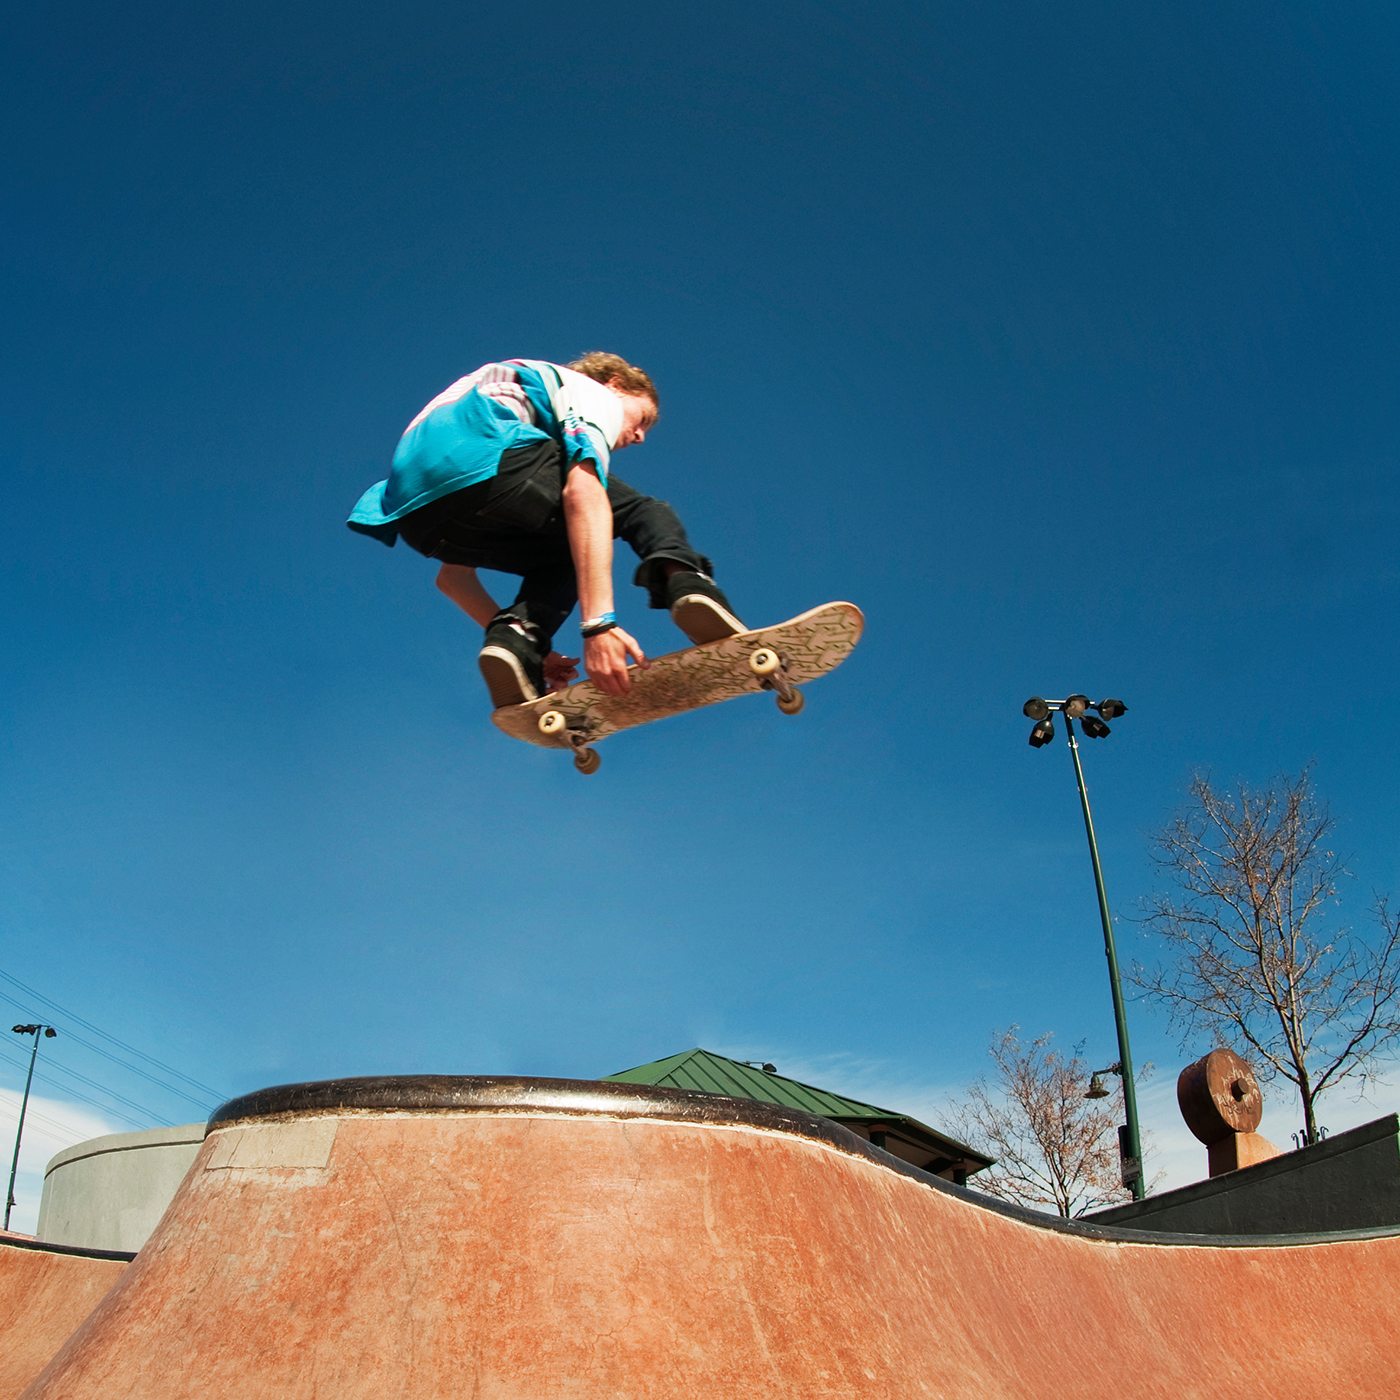 Low angle view of man jumping with skateboard at skate ramp against blue sky